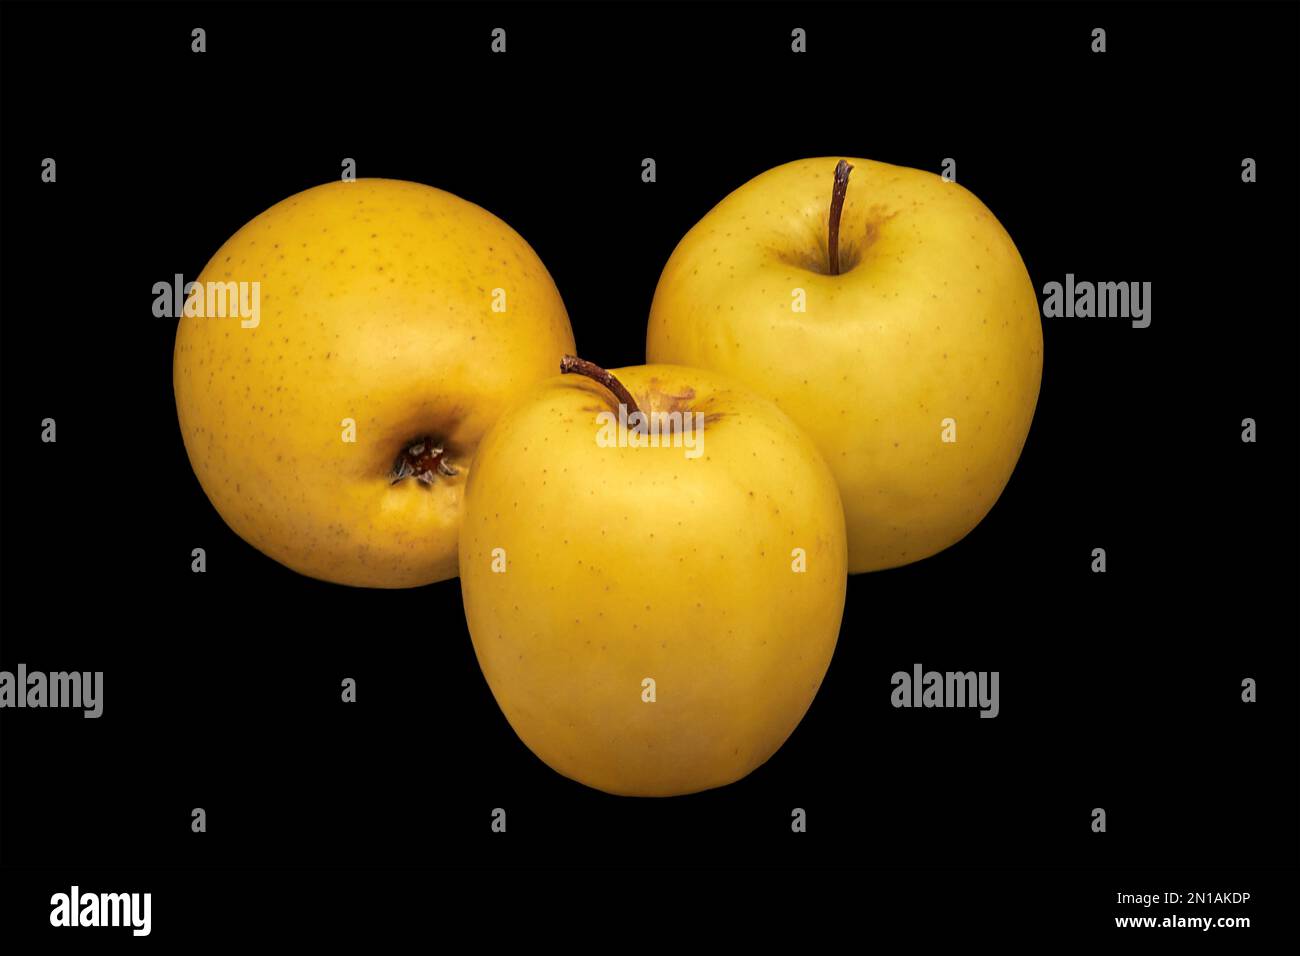 Image of three ripe yellow apples on a black background Stock Photo